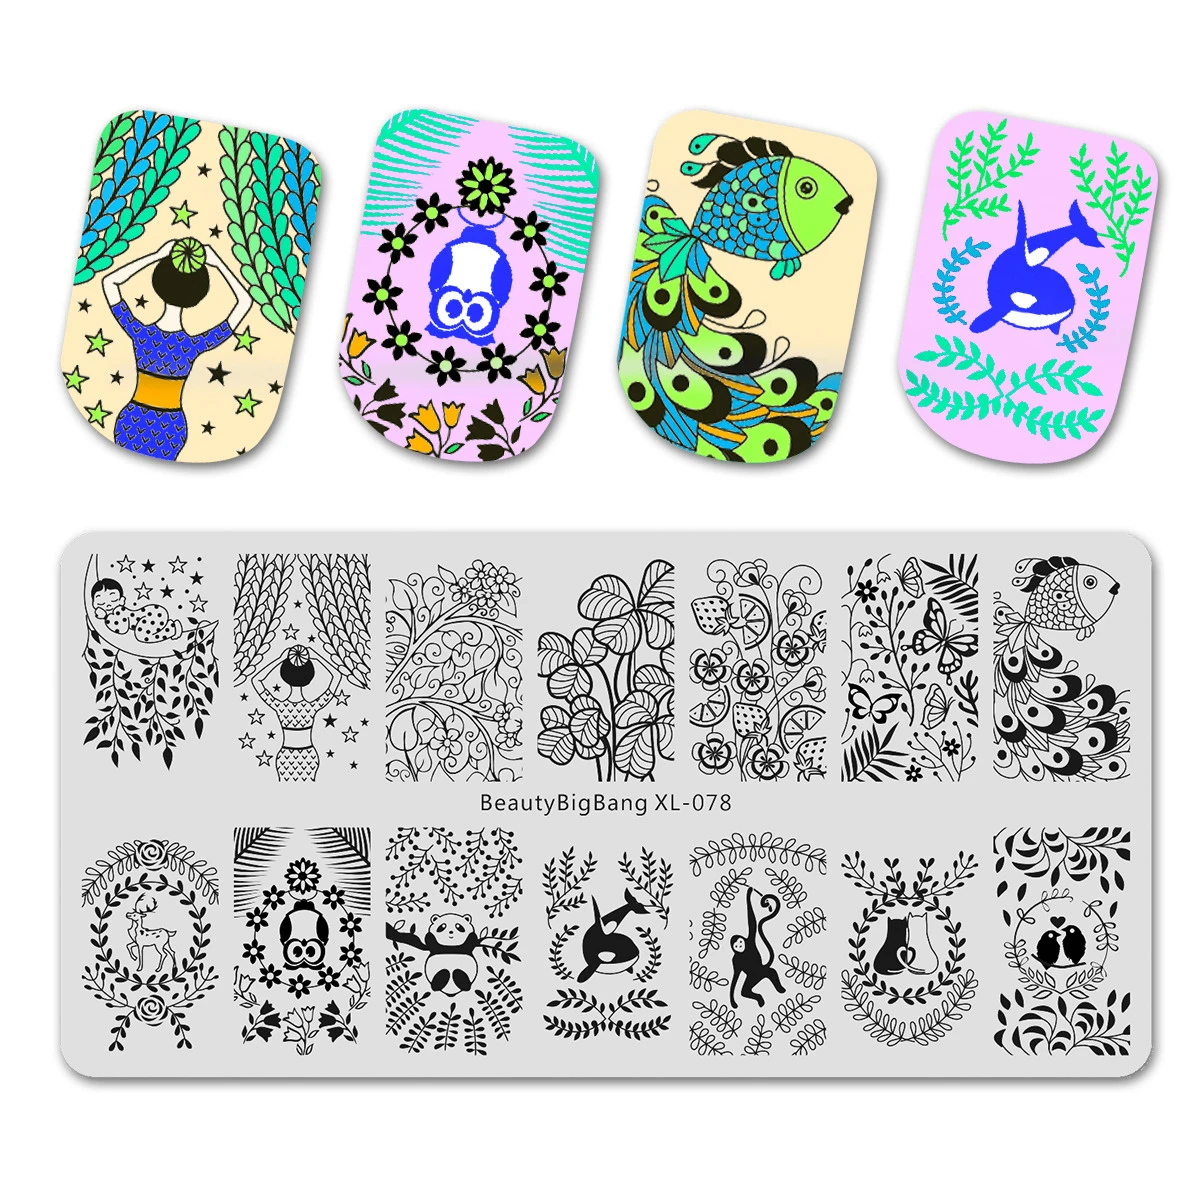 Beautybigbang Nail Art Stamping Plates Fantasy Dot Point Vortex Girl Image Stainless Steel Nails Stamping Template Mold XL-086 - Цвет: 78